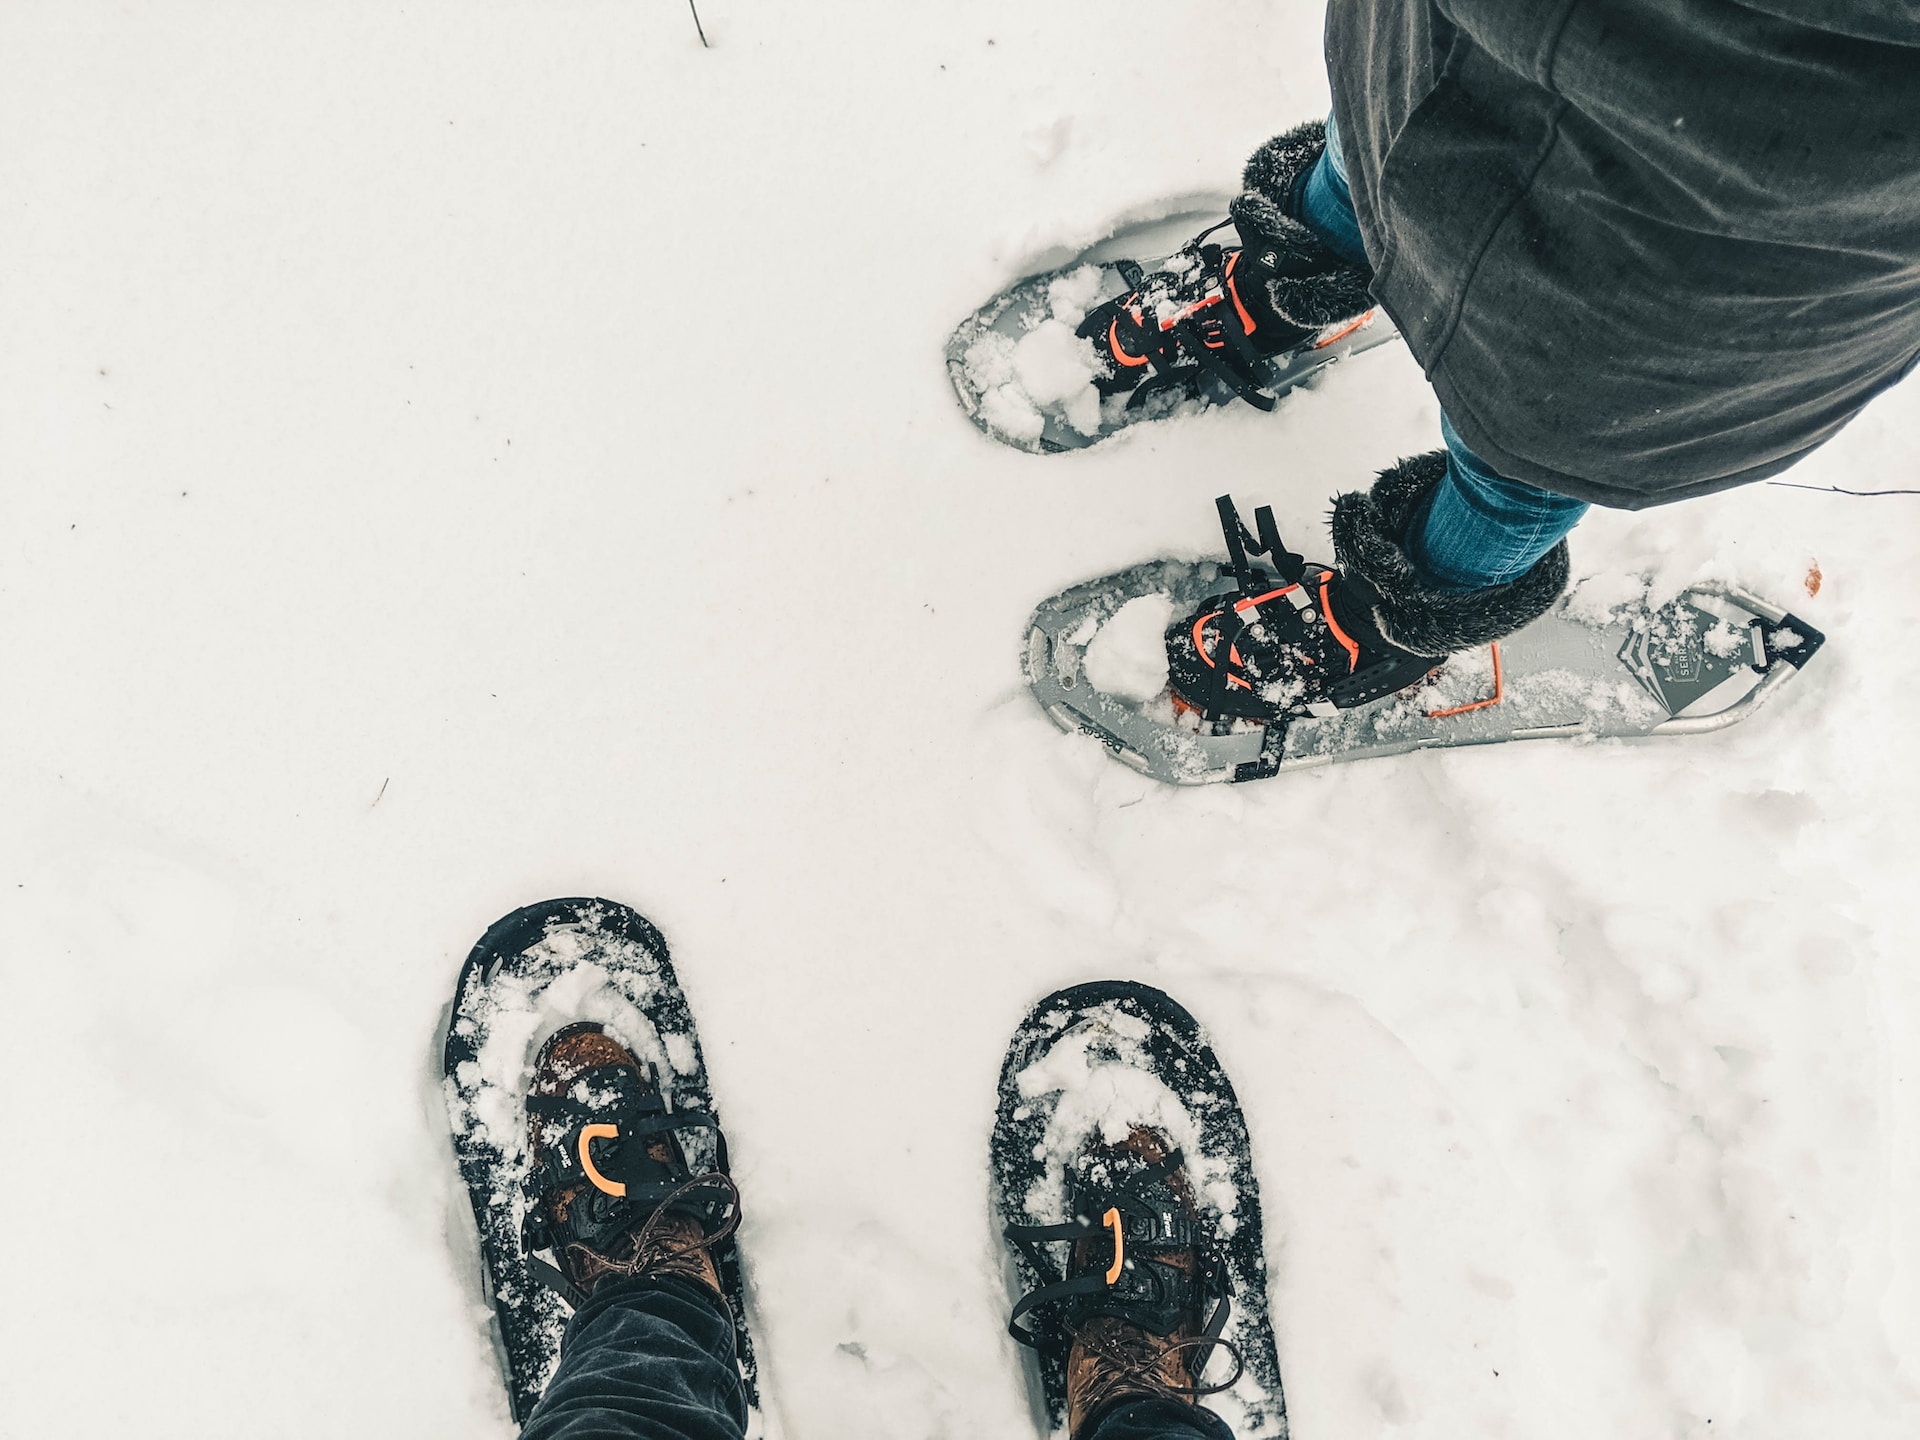 Go snowshoeing in Whitefish